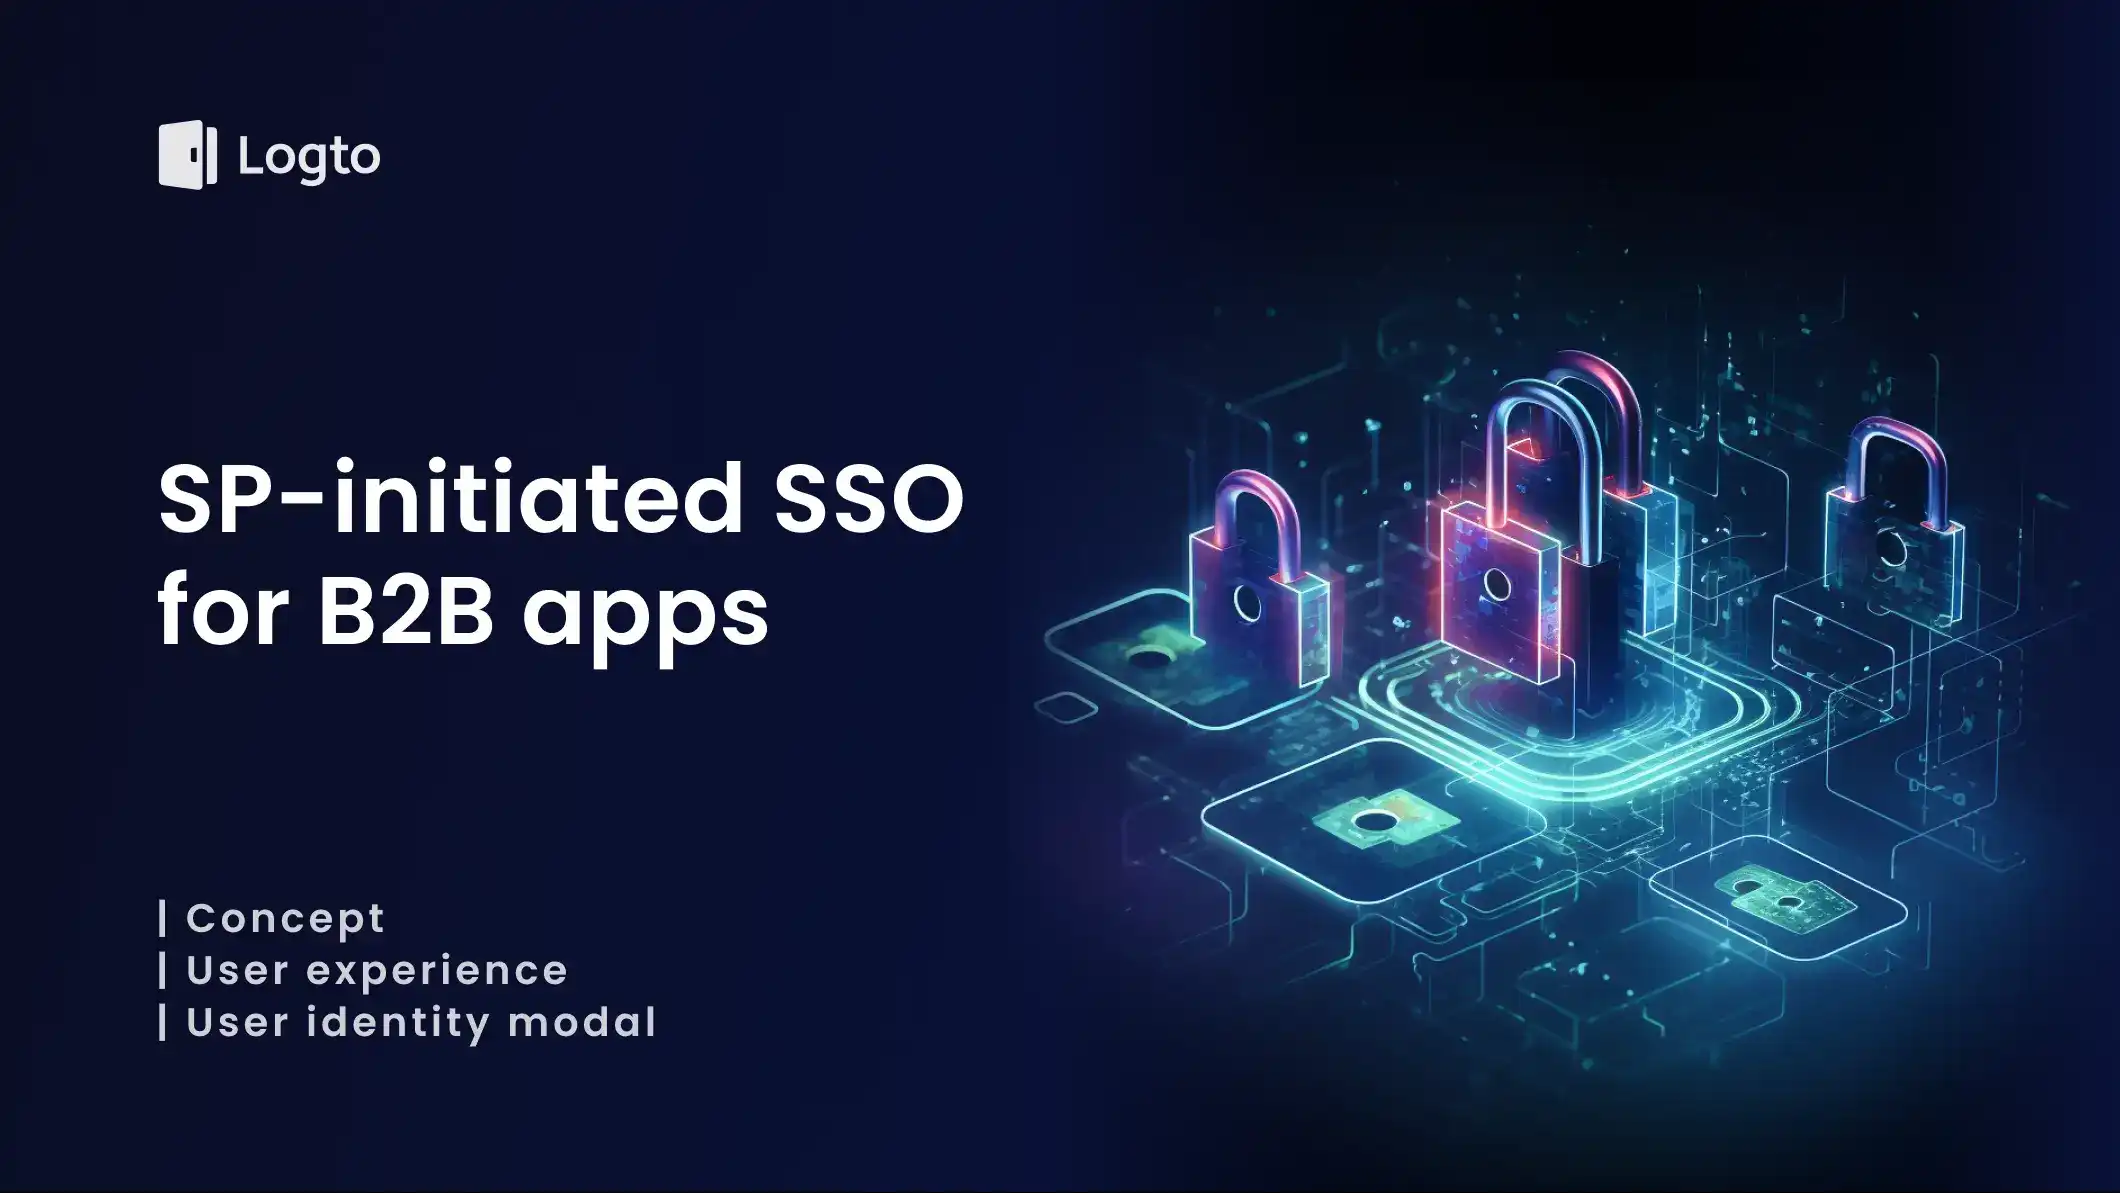 Learn about SP-initiated SSO for B2B apps